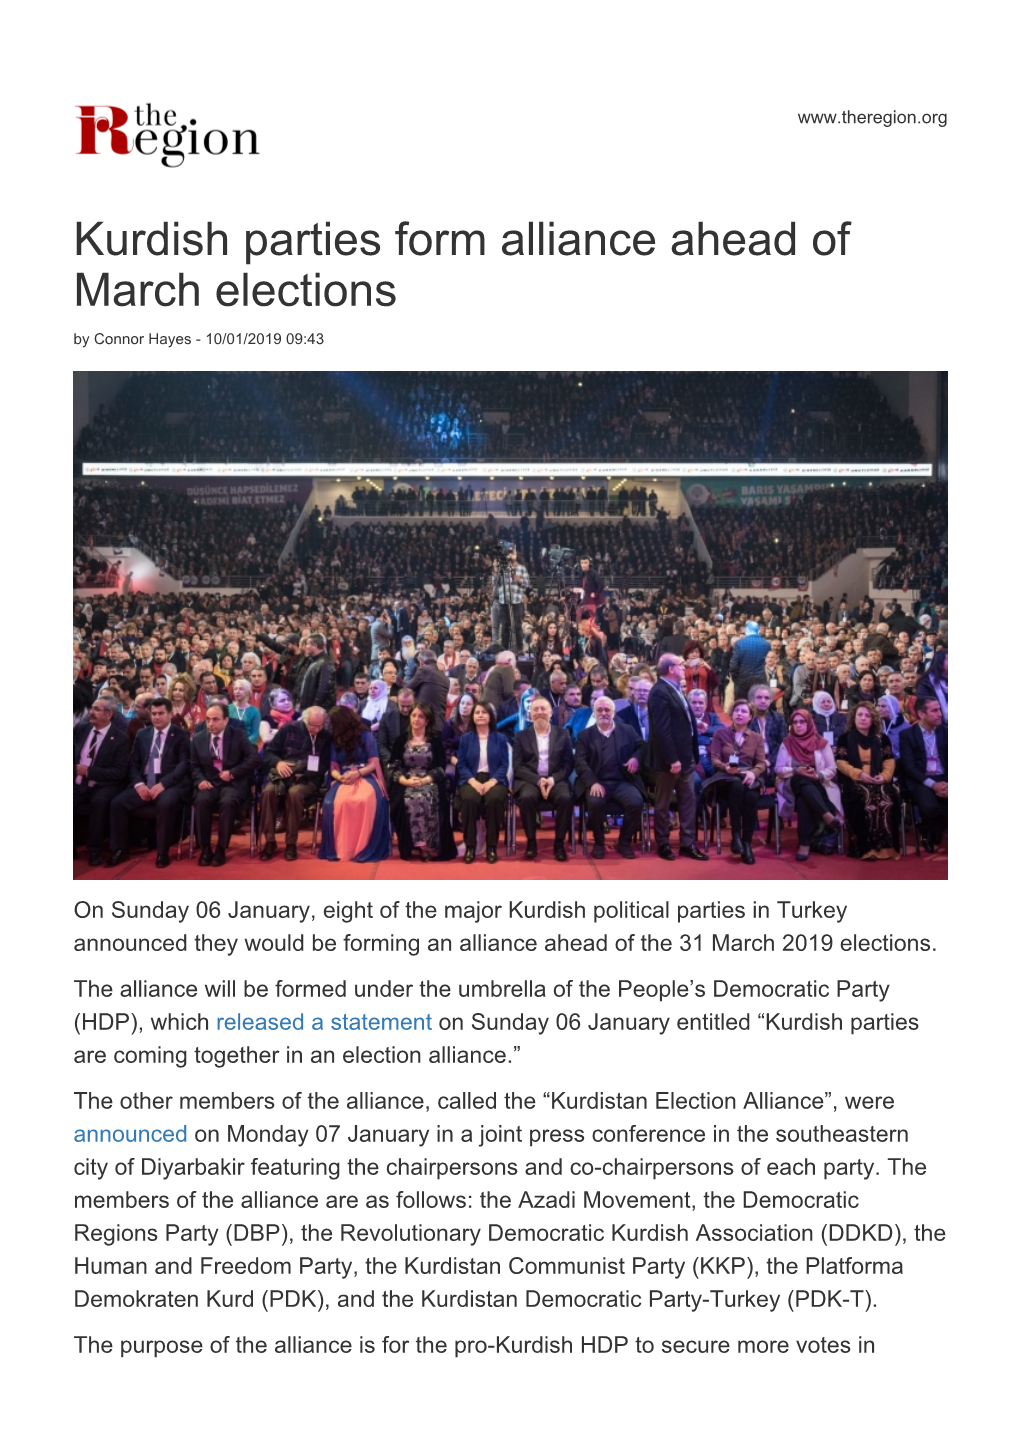 Kurdish Parties Form Alliance Ahead of March Elections by Connor Hayes - 10/01/2019 09:43